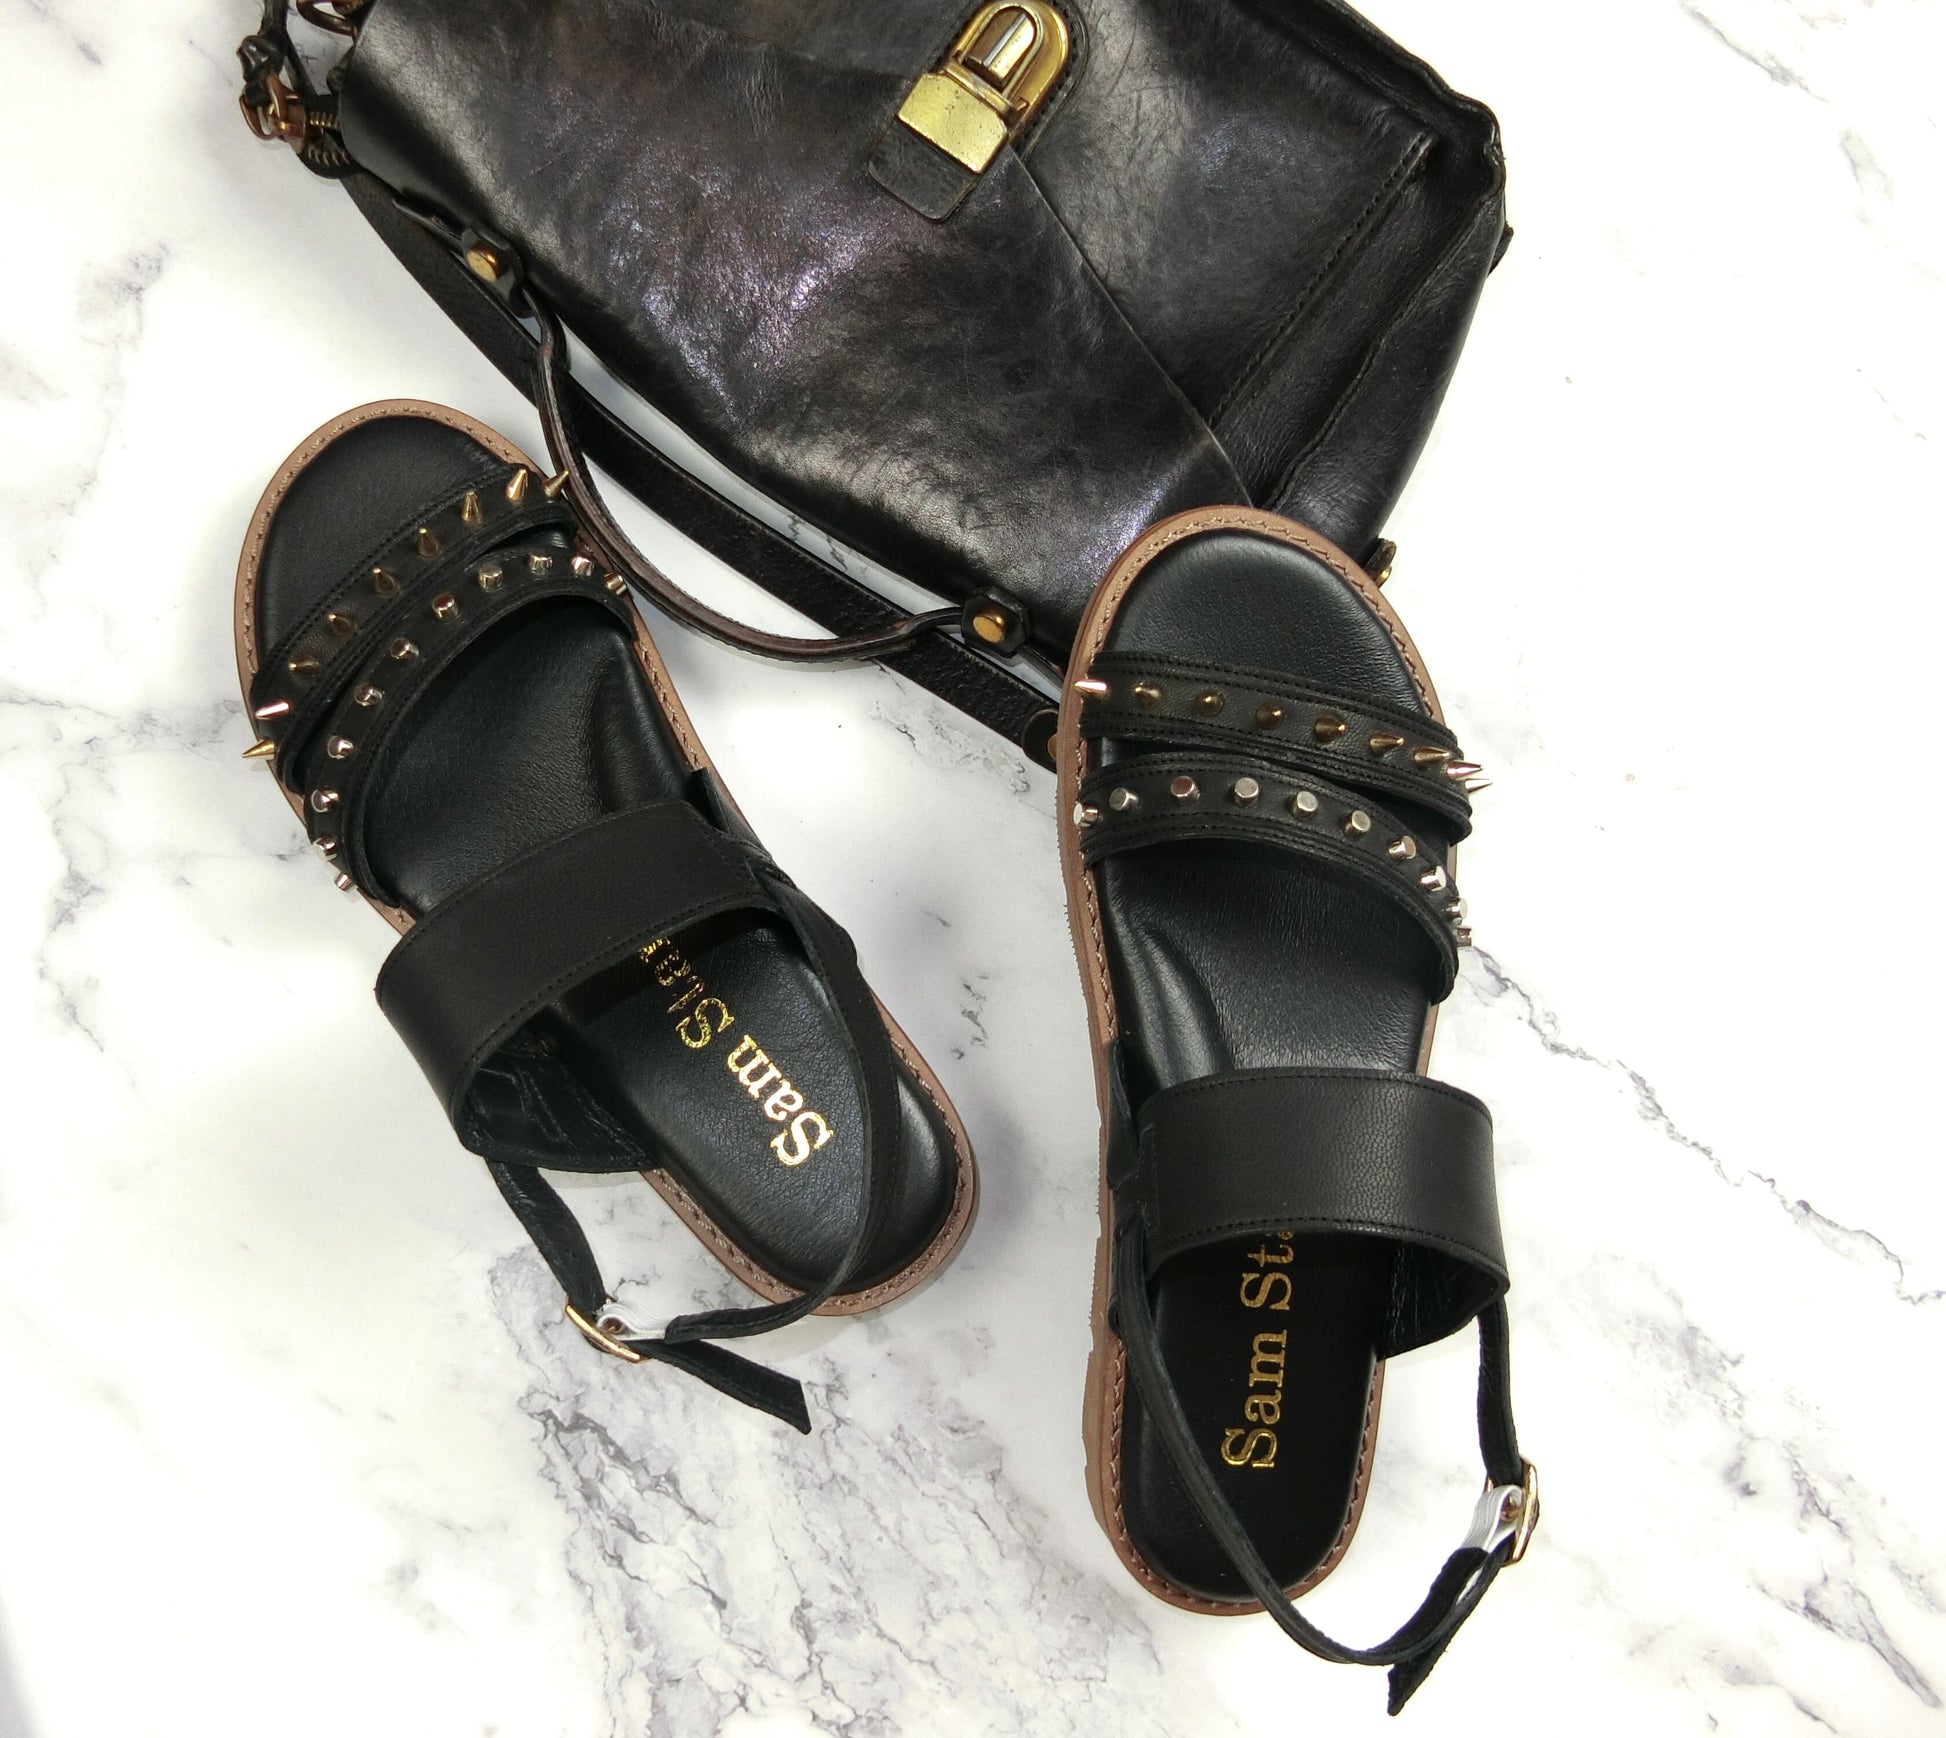 SS22018/19 Leather flat sandals with studs detail Sam Star Shoes Black 3 (36) 